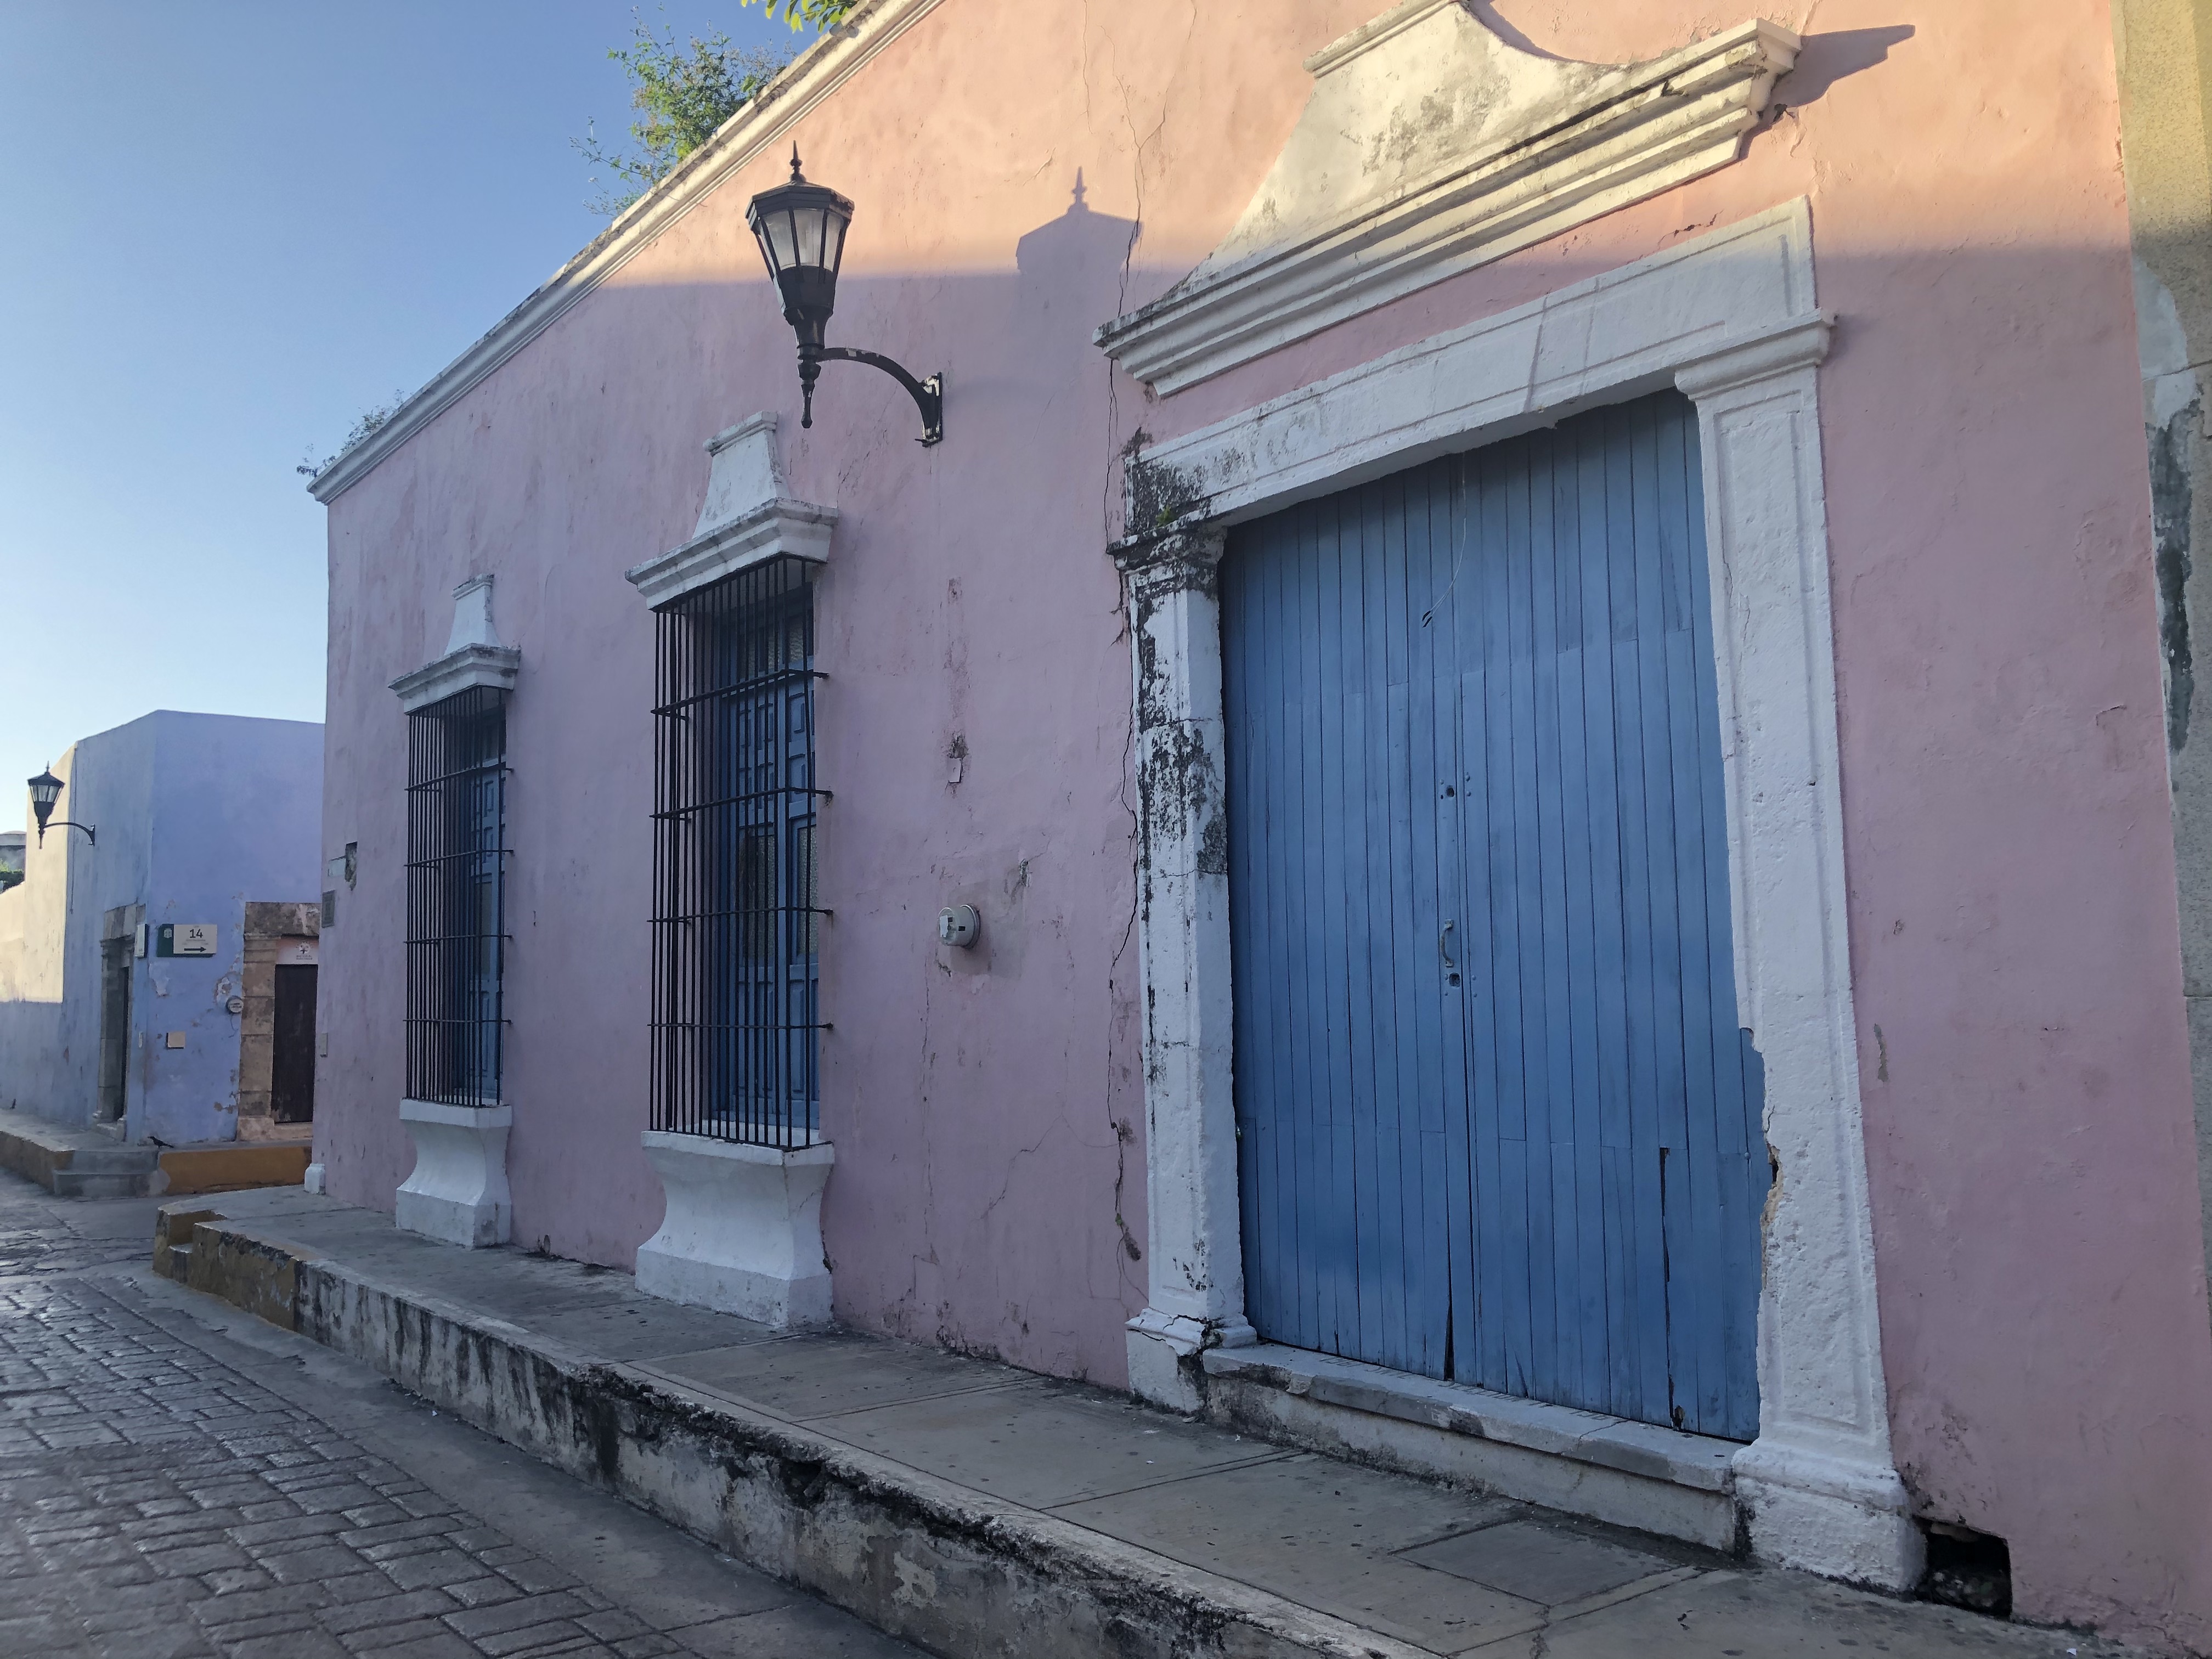 The Colors of Campeche